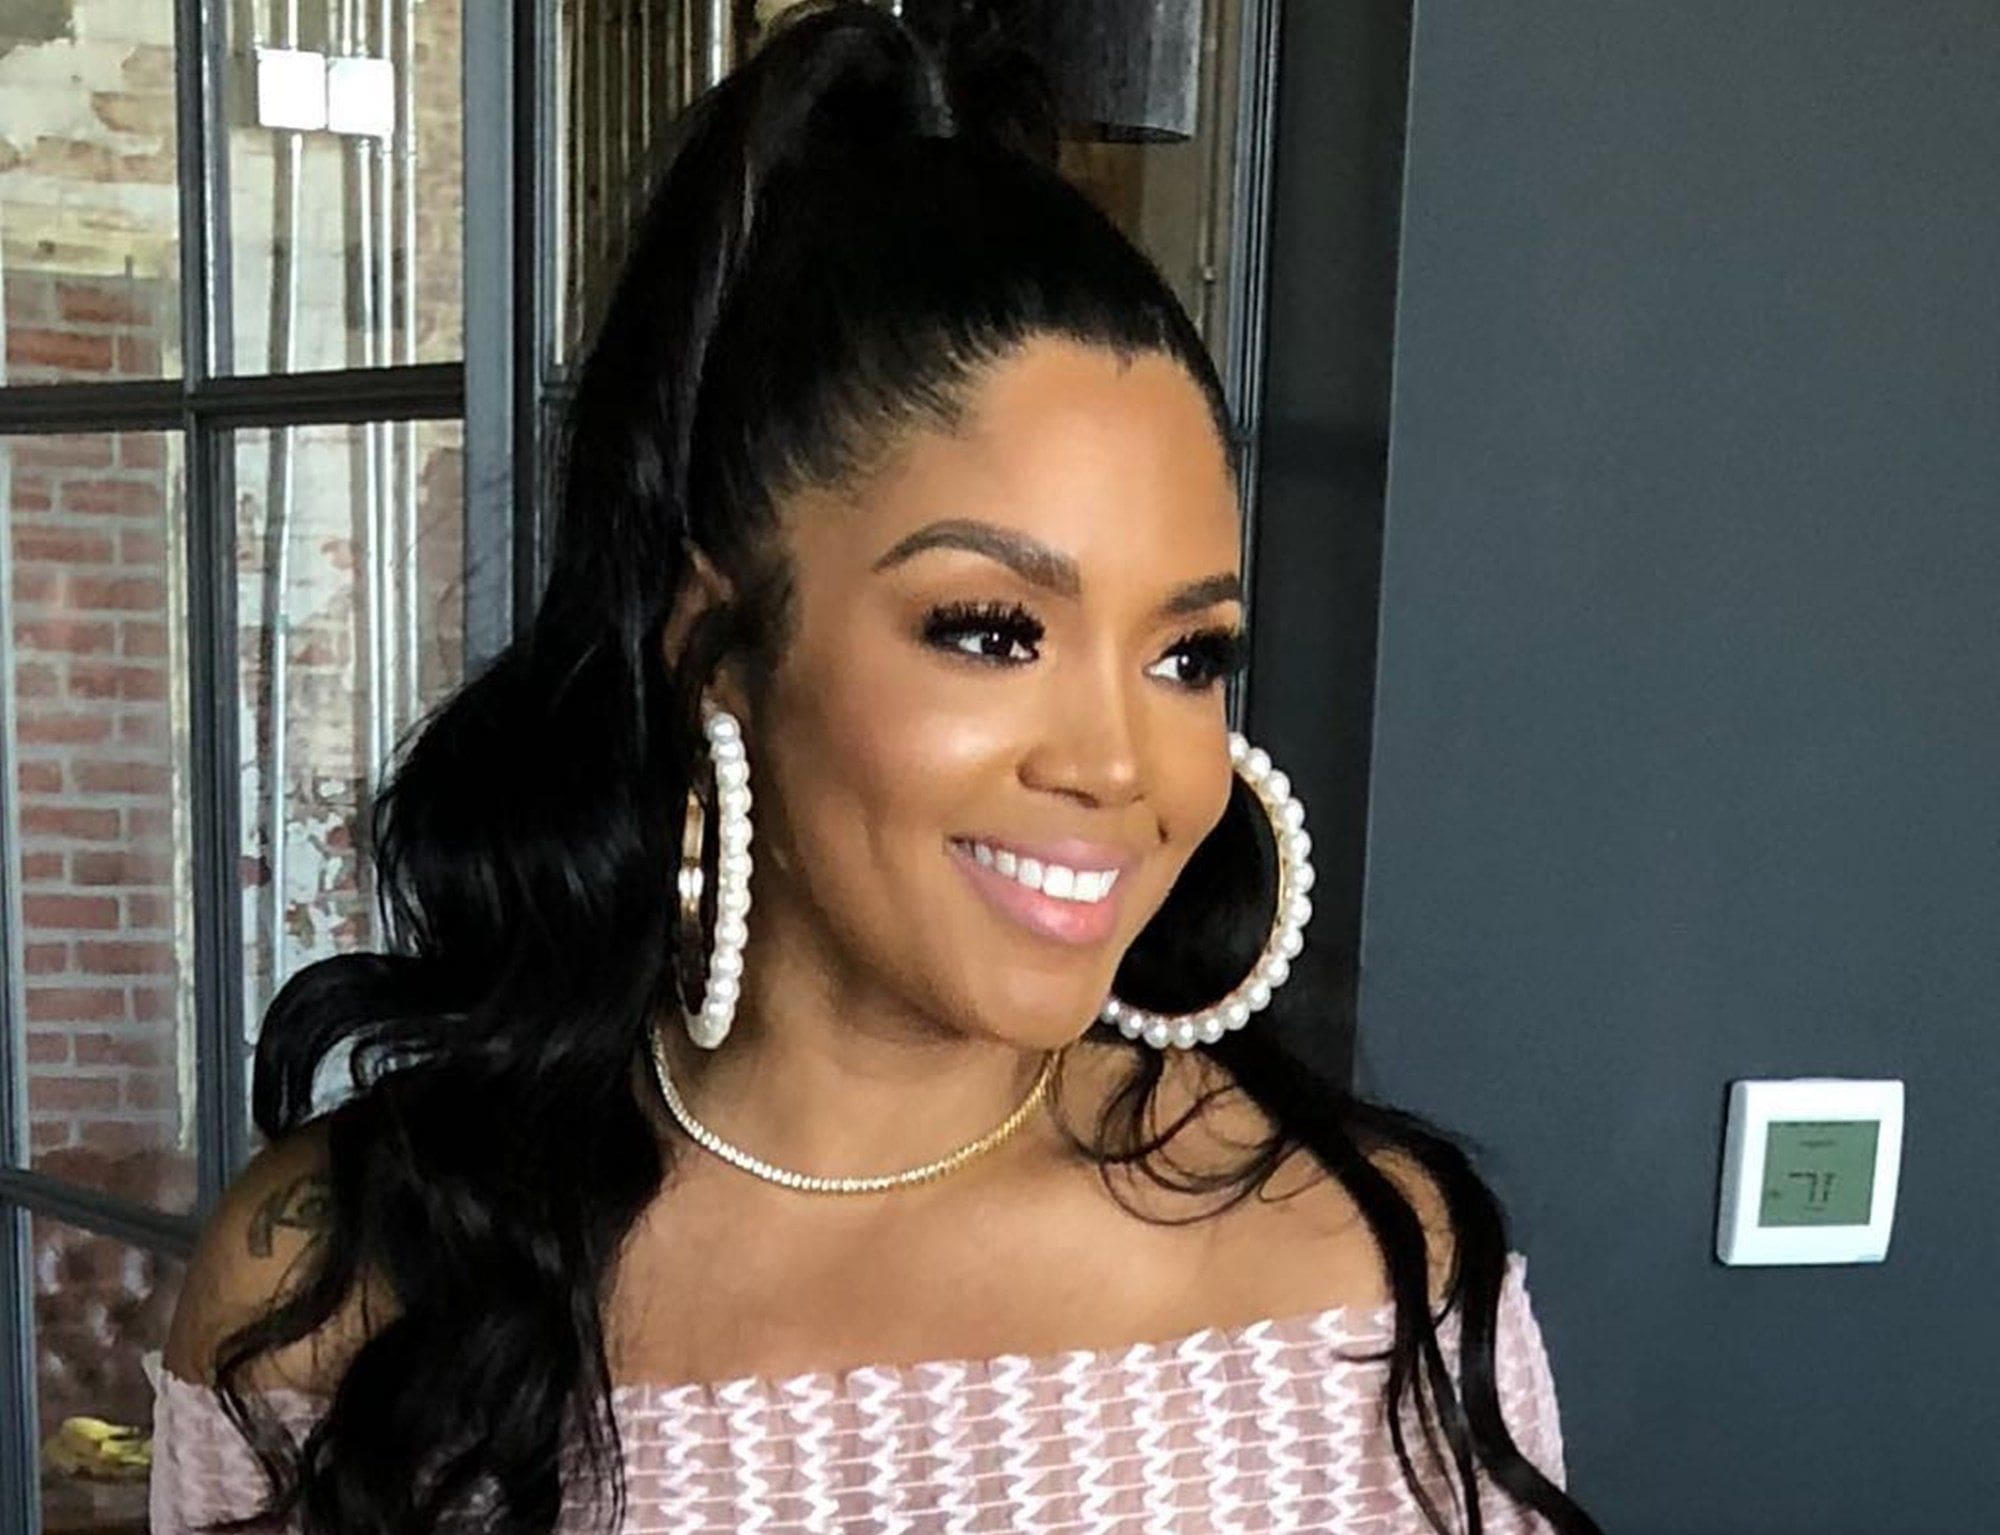 Rasheeda Frost Is Getting Ready For Her Upcoming Birthday - Check Out Her Video